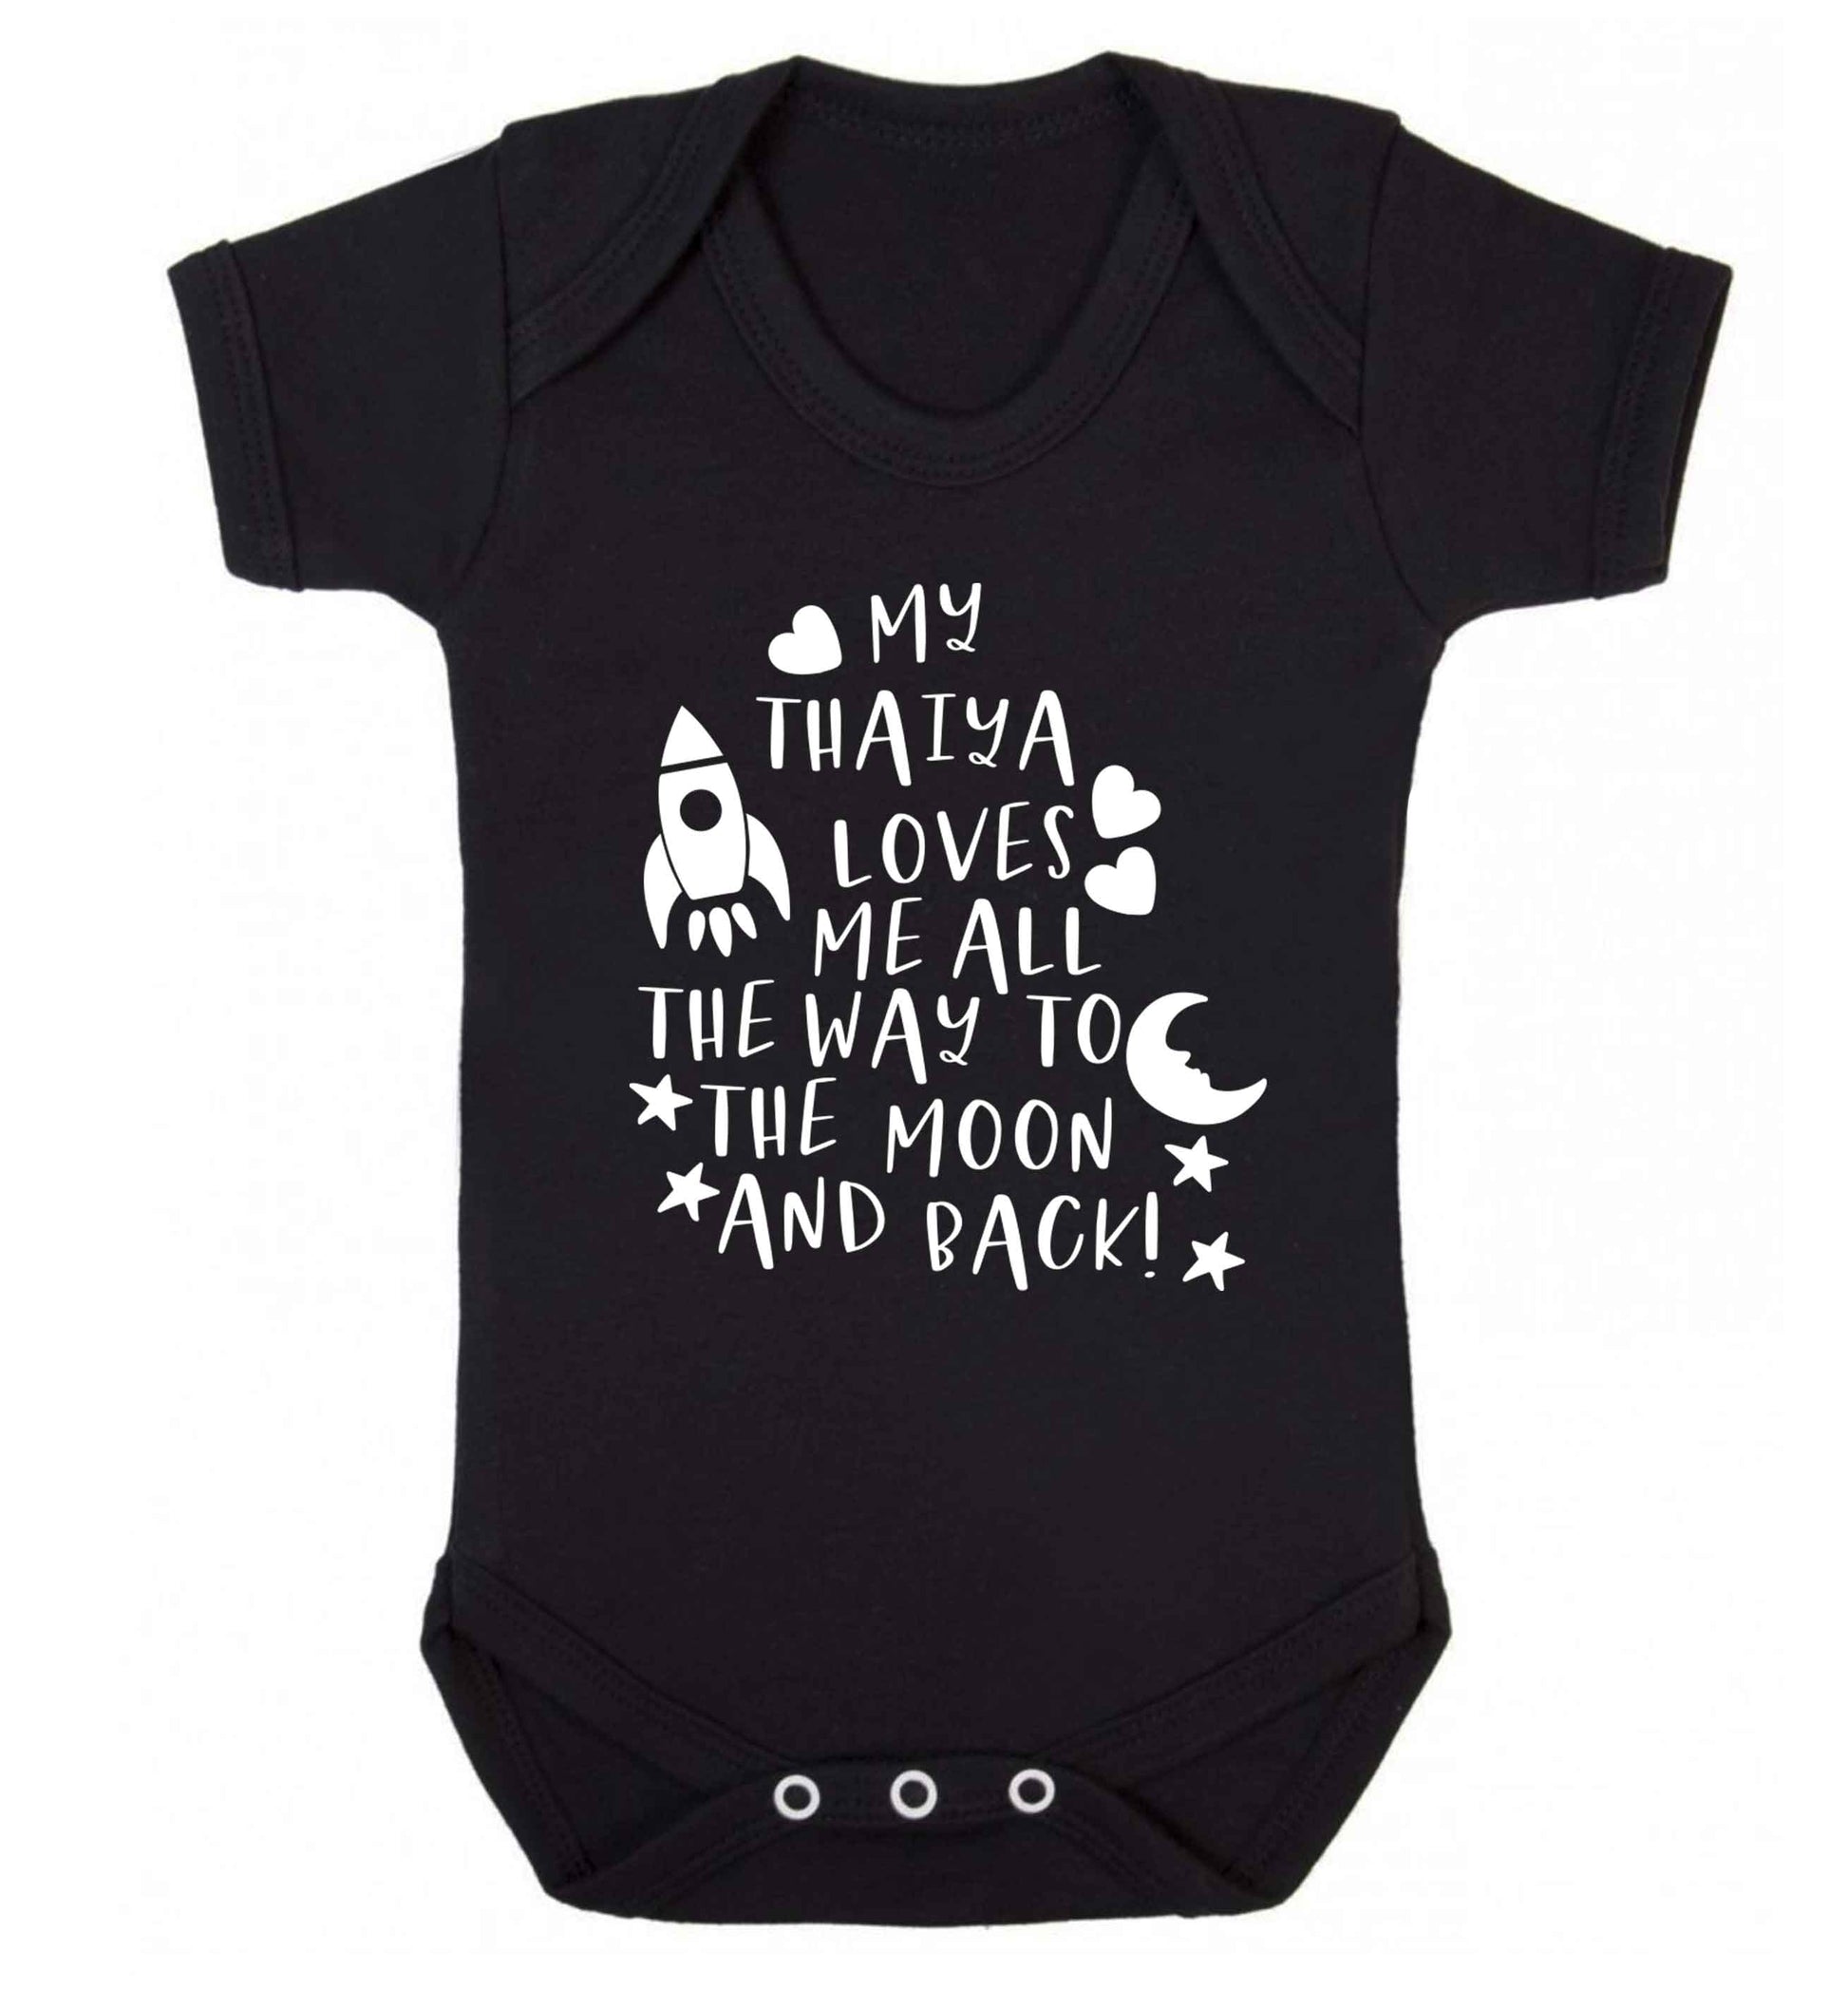 My thaiya loves me all the way to the moon and back Baby Vest black 18-24 months